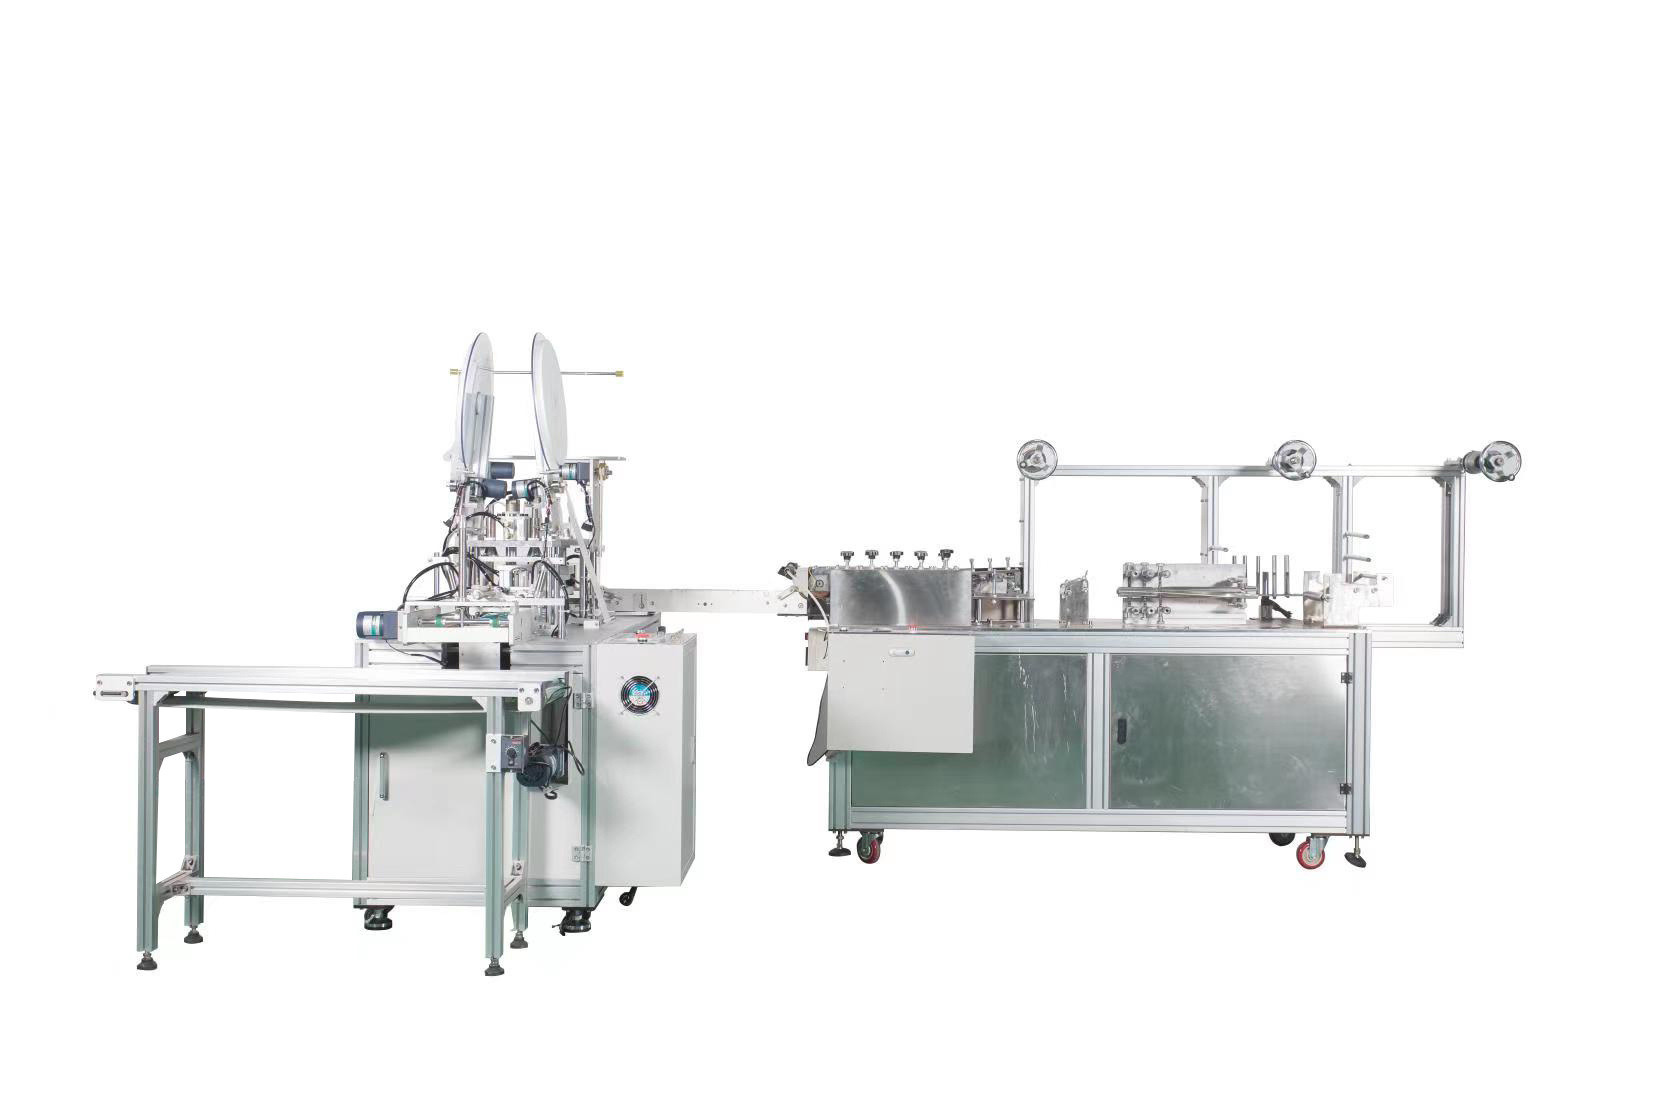 Cap Making Face Mask Automatic Disposable Kf94 Mask Machine (Practical Type)